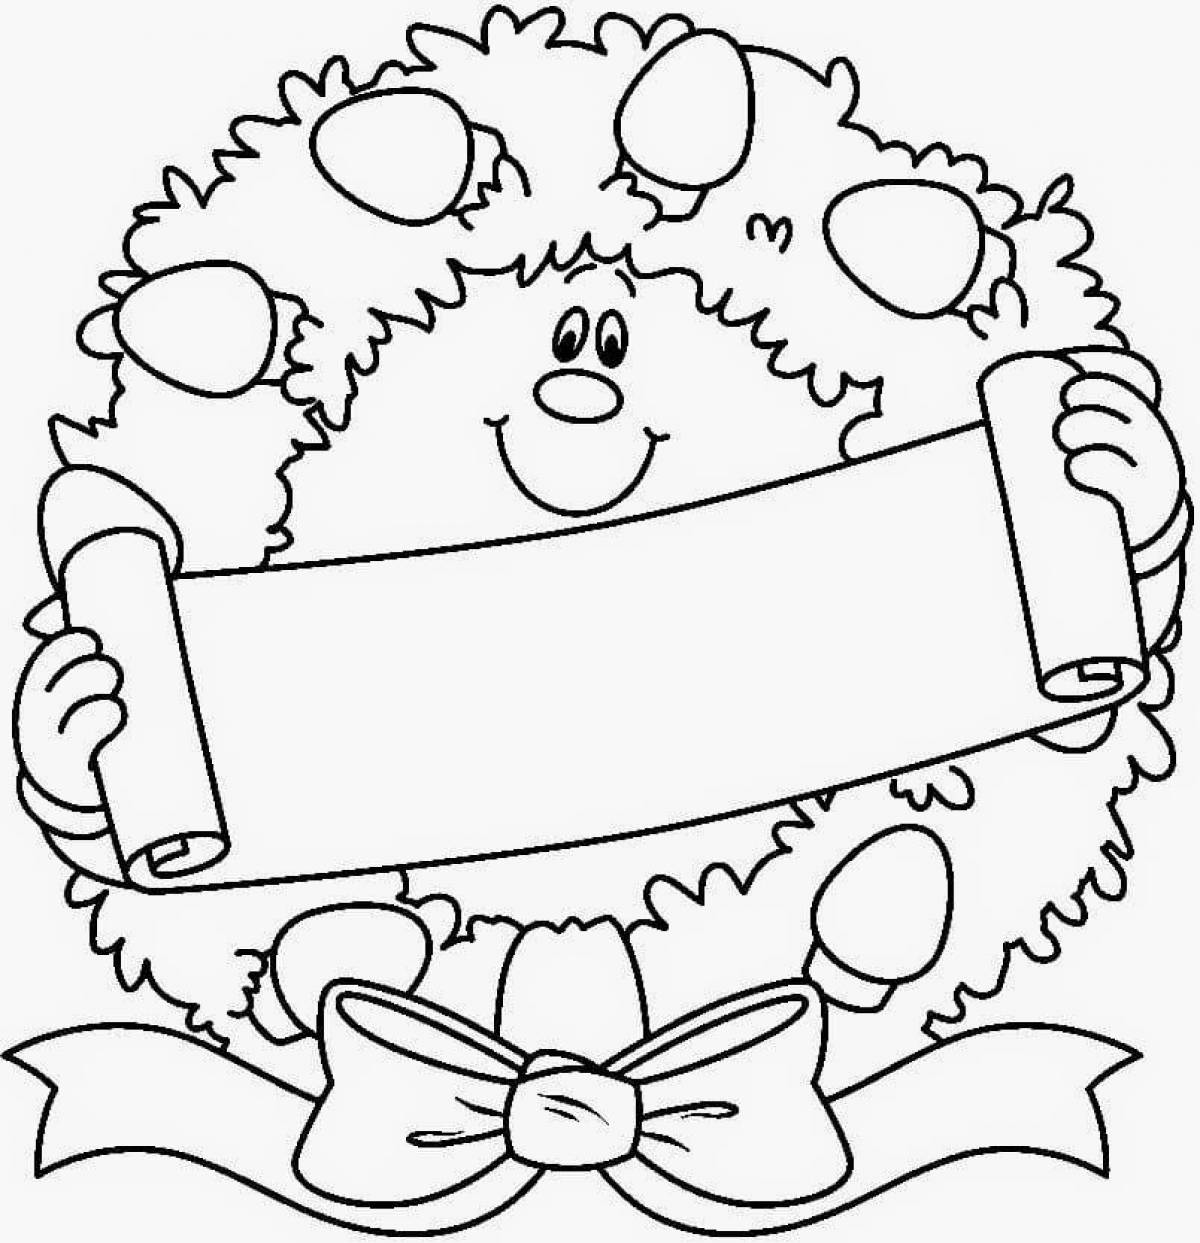 Elegant Christmas wreath coloring page